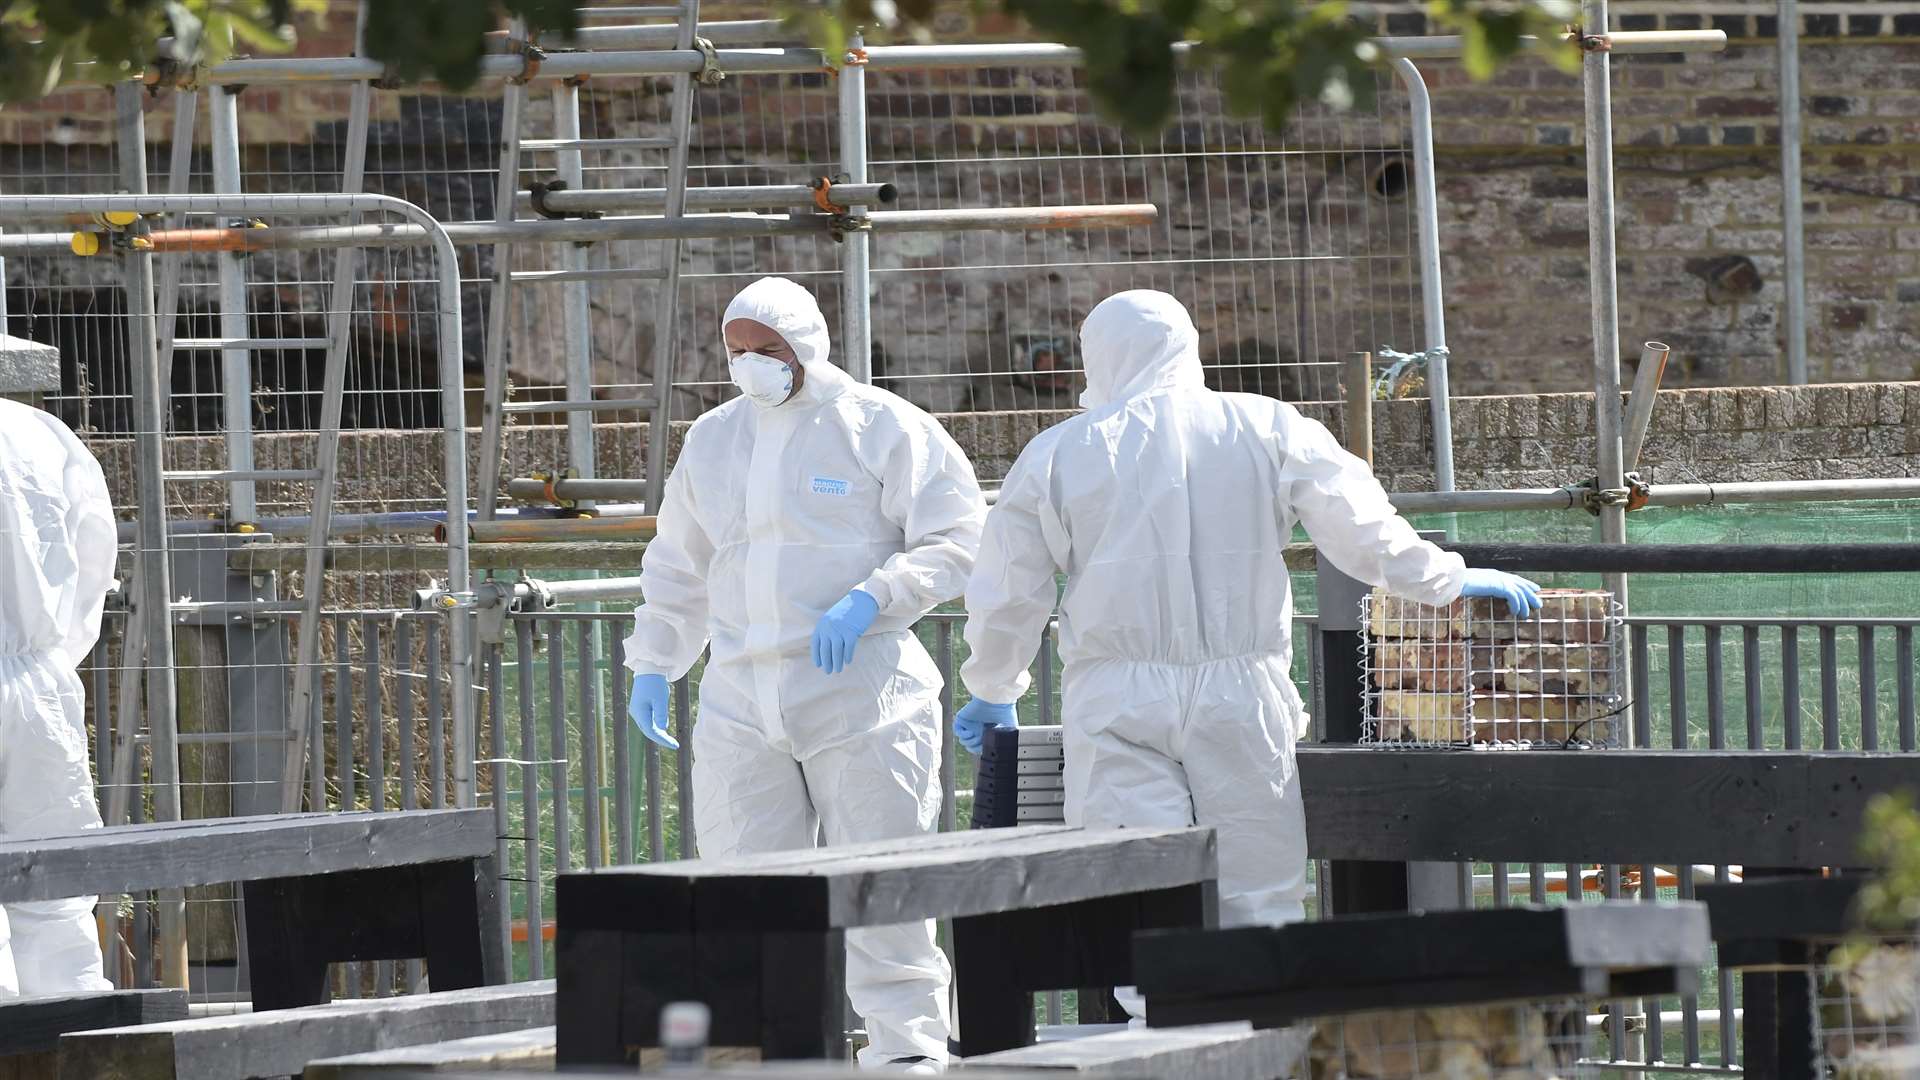 Forensic officers at the scene. Picture: Tony Flashman